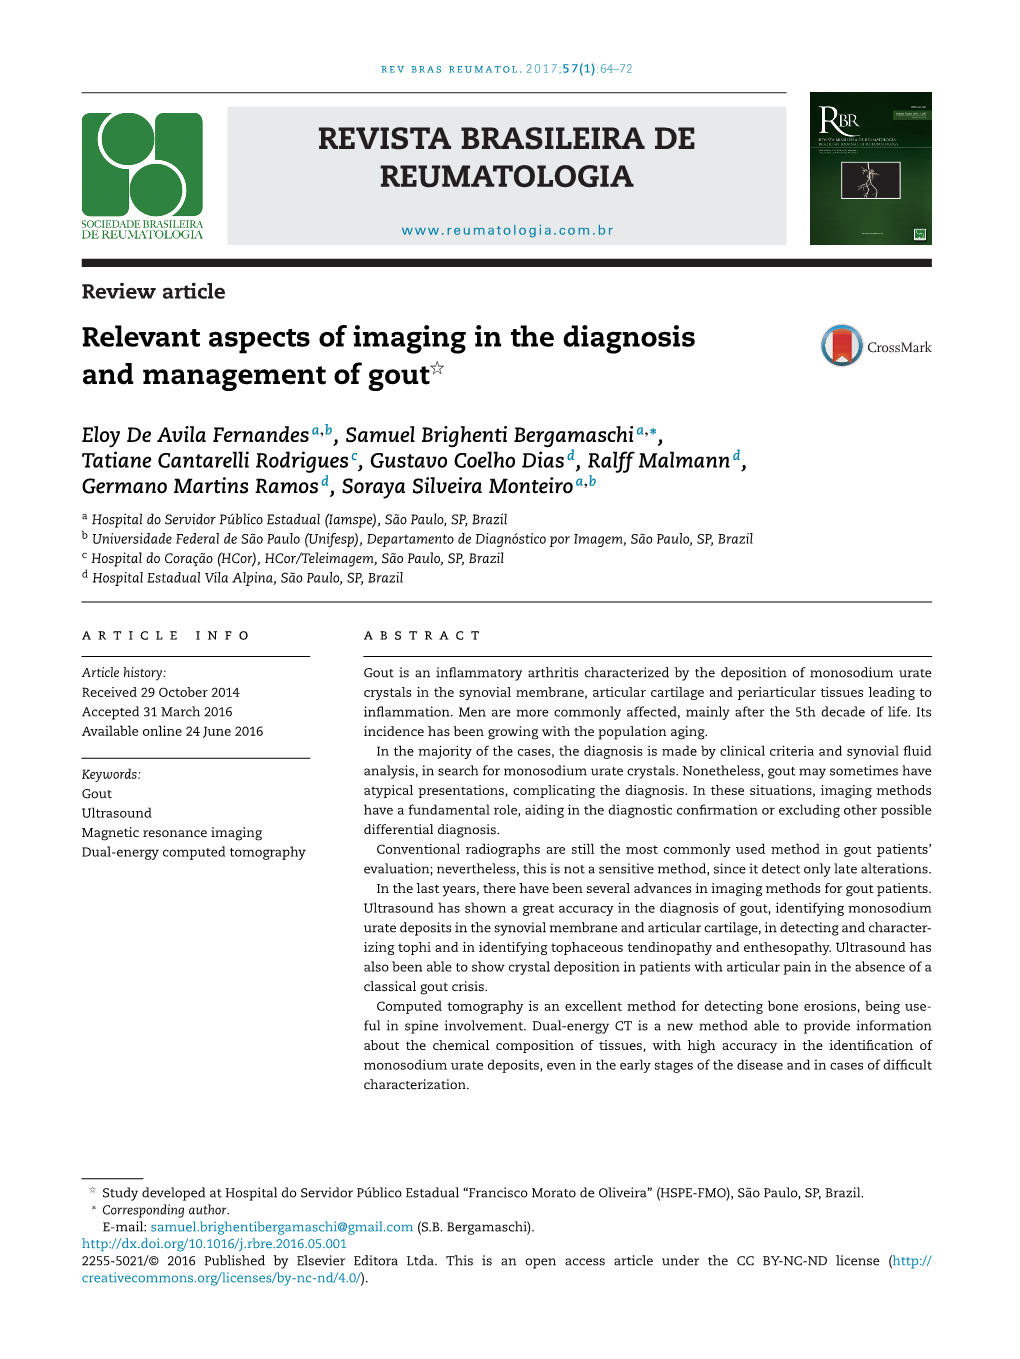 Relevant Aspects of Imaging in the Diagnosis and Management of Gout